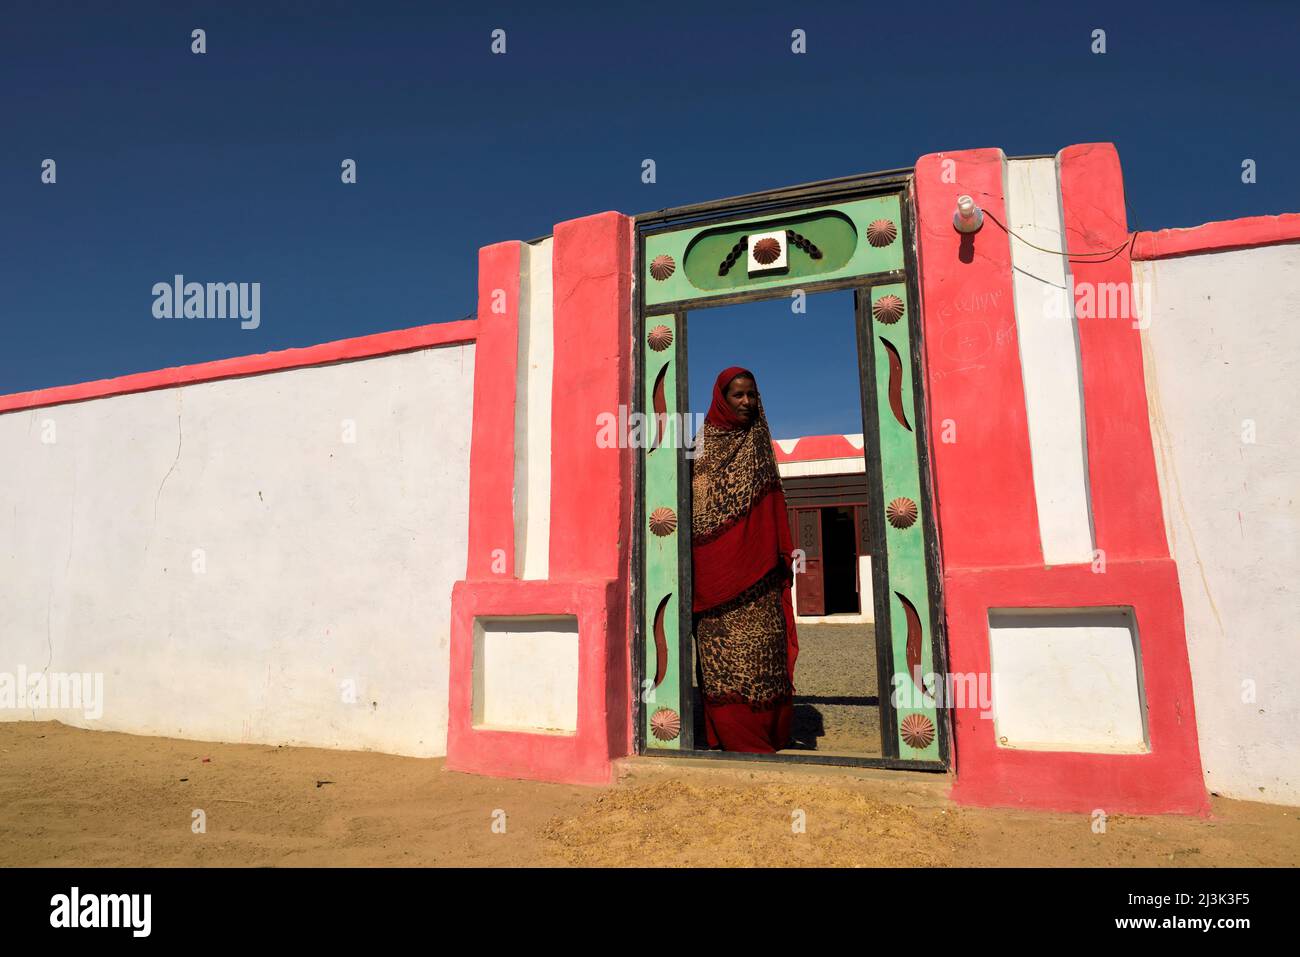 Nubian villagers pose outside freshly painted walls.; Sudan, Africa. Stock Photo